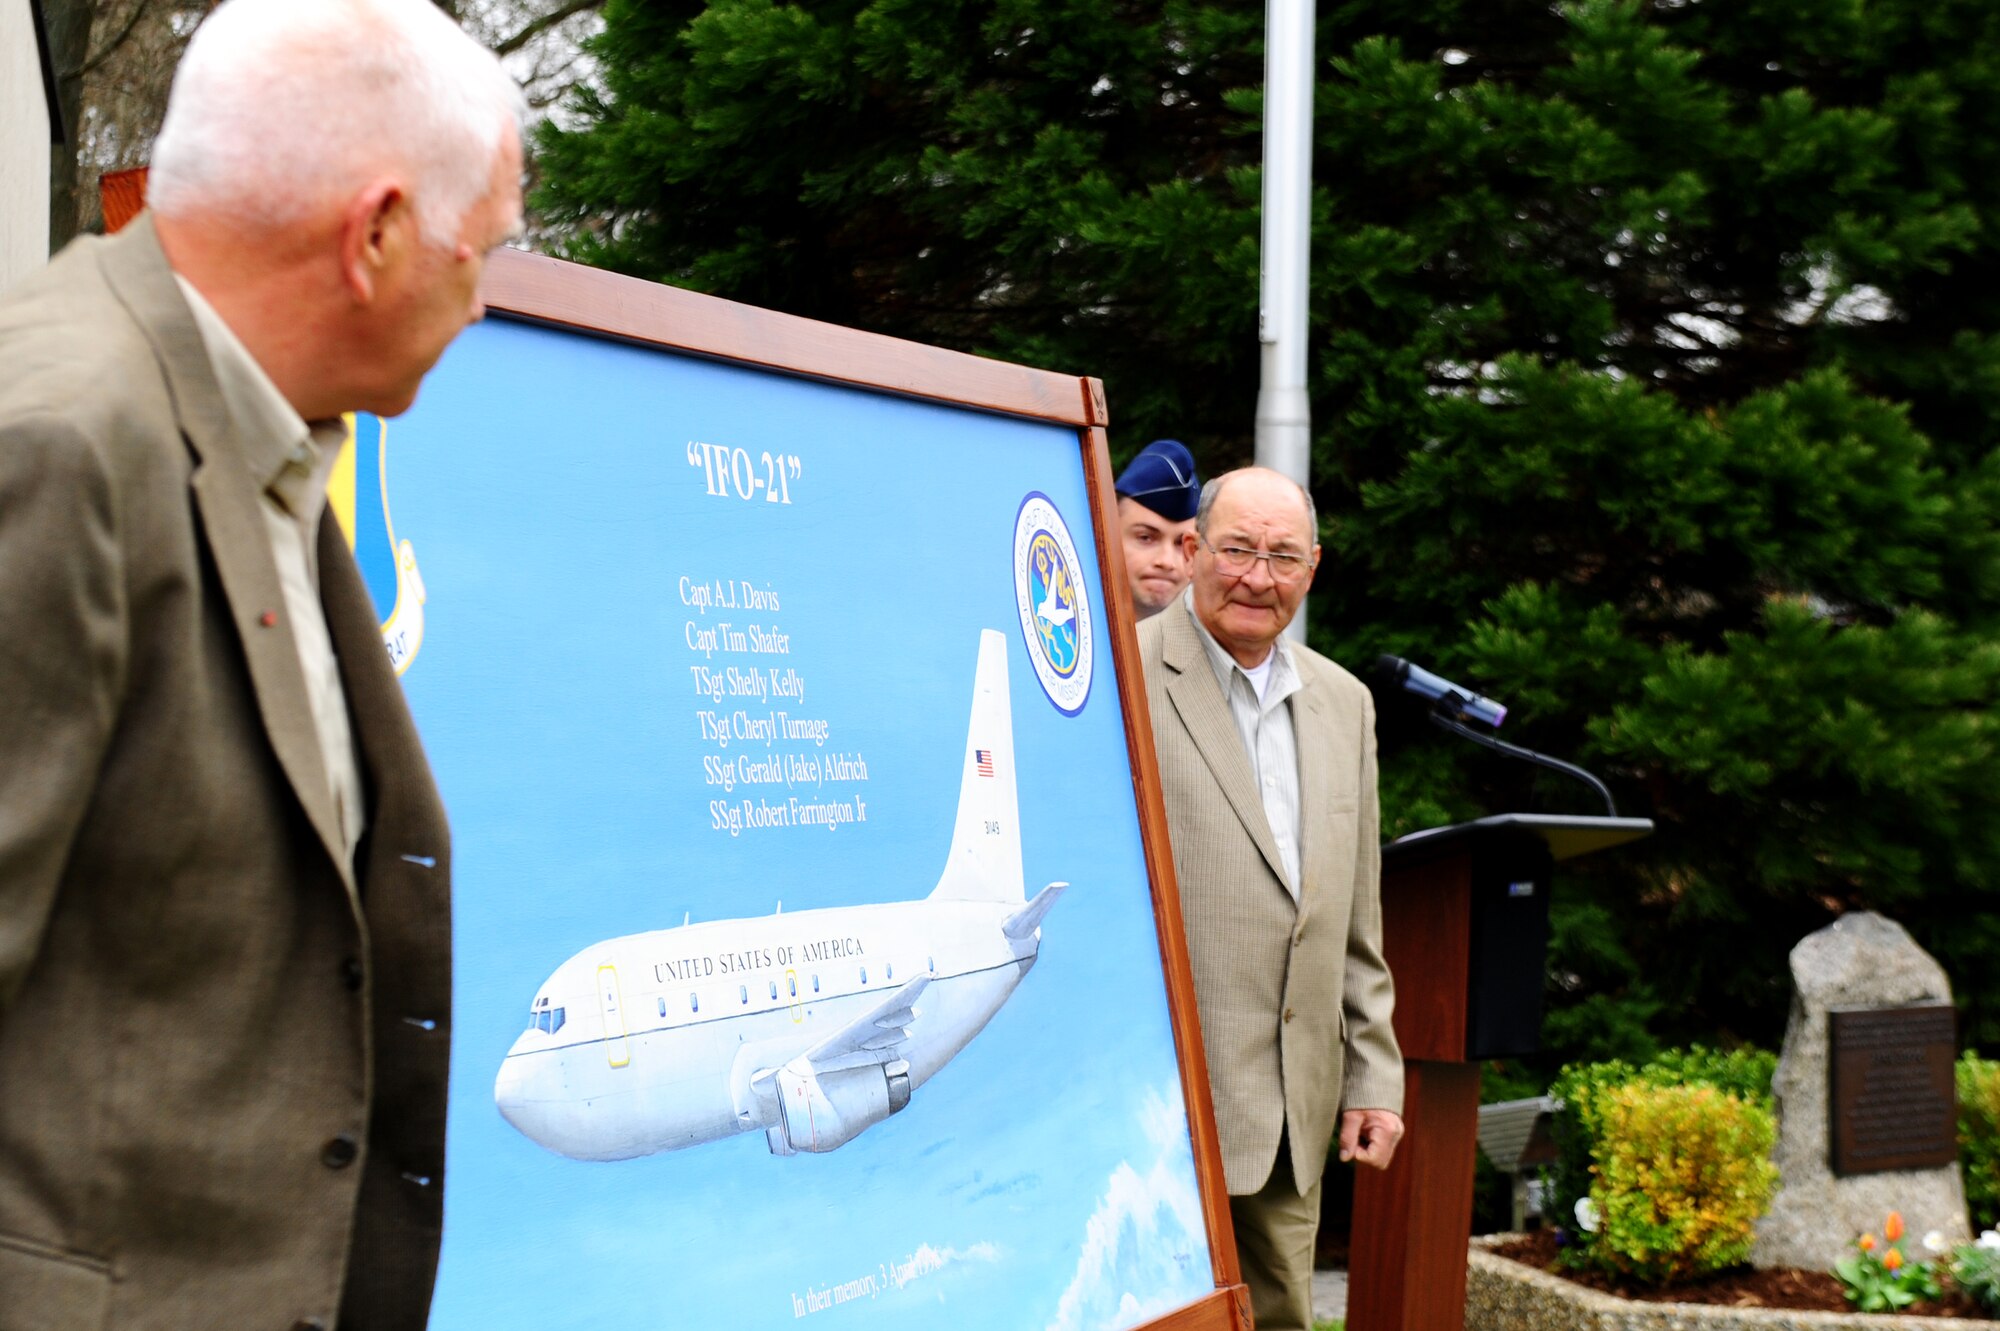 Senior Master Sgt. Mel Sylvester (ret.) and Master Sgt. Mike Bulko (ret.) present a painting during a memorial ceremony on Ramstein Air Base, April 5, 2012. Sylvester and Bulko painted the portrait in honor of the members on flight IFO-21. On April 3, 1996, a CT-43 aircraft that was assigned to the 76th Airlift Squadron crashed outside of Dubrovnik Croatia during a peacekeeping mission. The squadron honored the six crew members of flight IFO-21 this year marking the 16th anniversary. (U.S. Air Force photo by Amn Brea Miller)